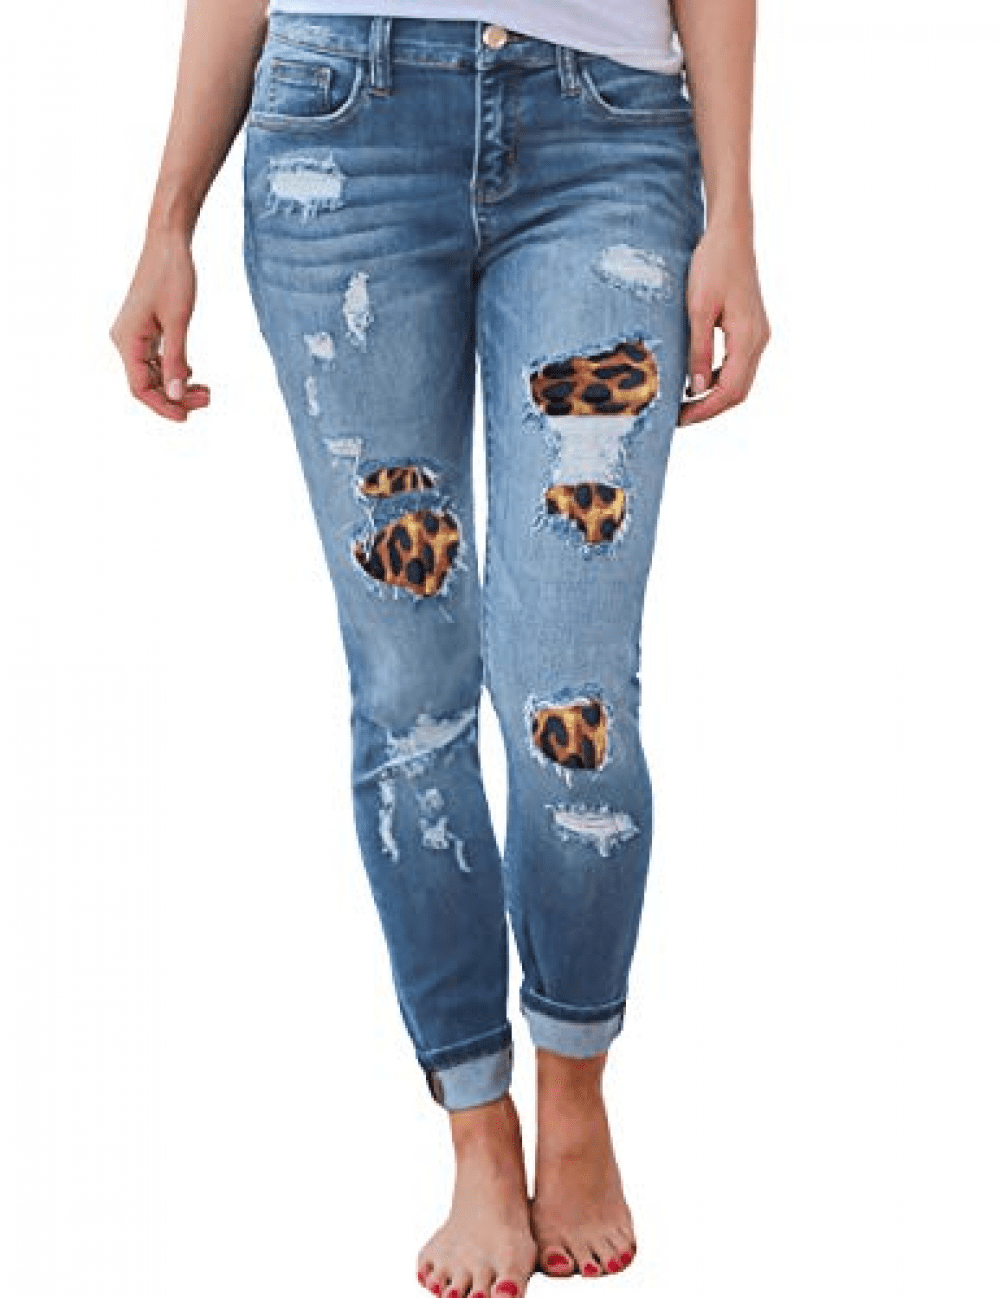 Sidefeel Women Distressed Skinny Jeans Leopard Stitching Ripped Denim Jeans 